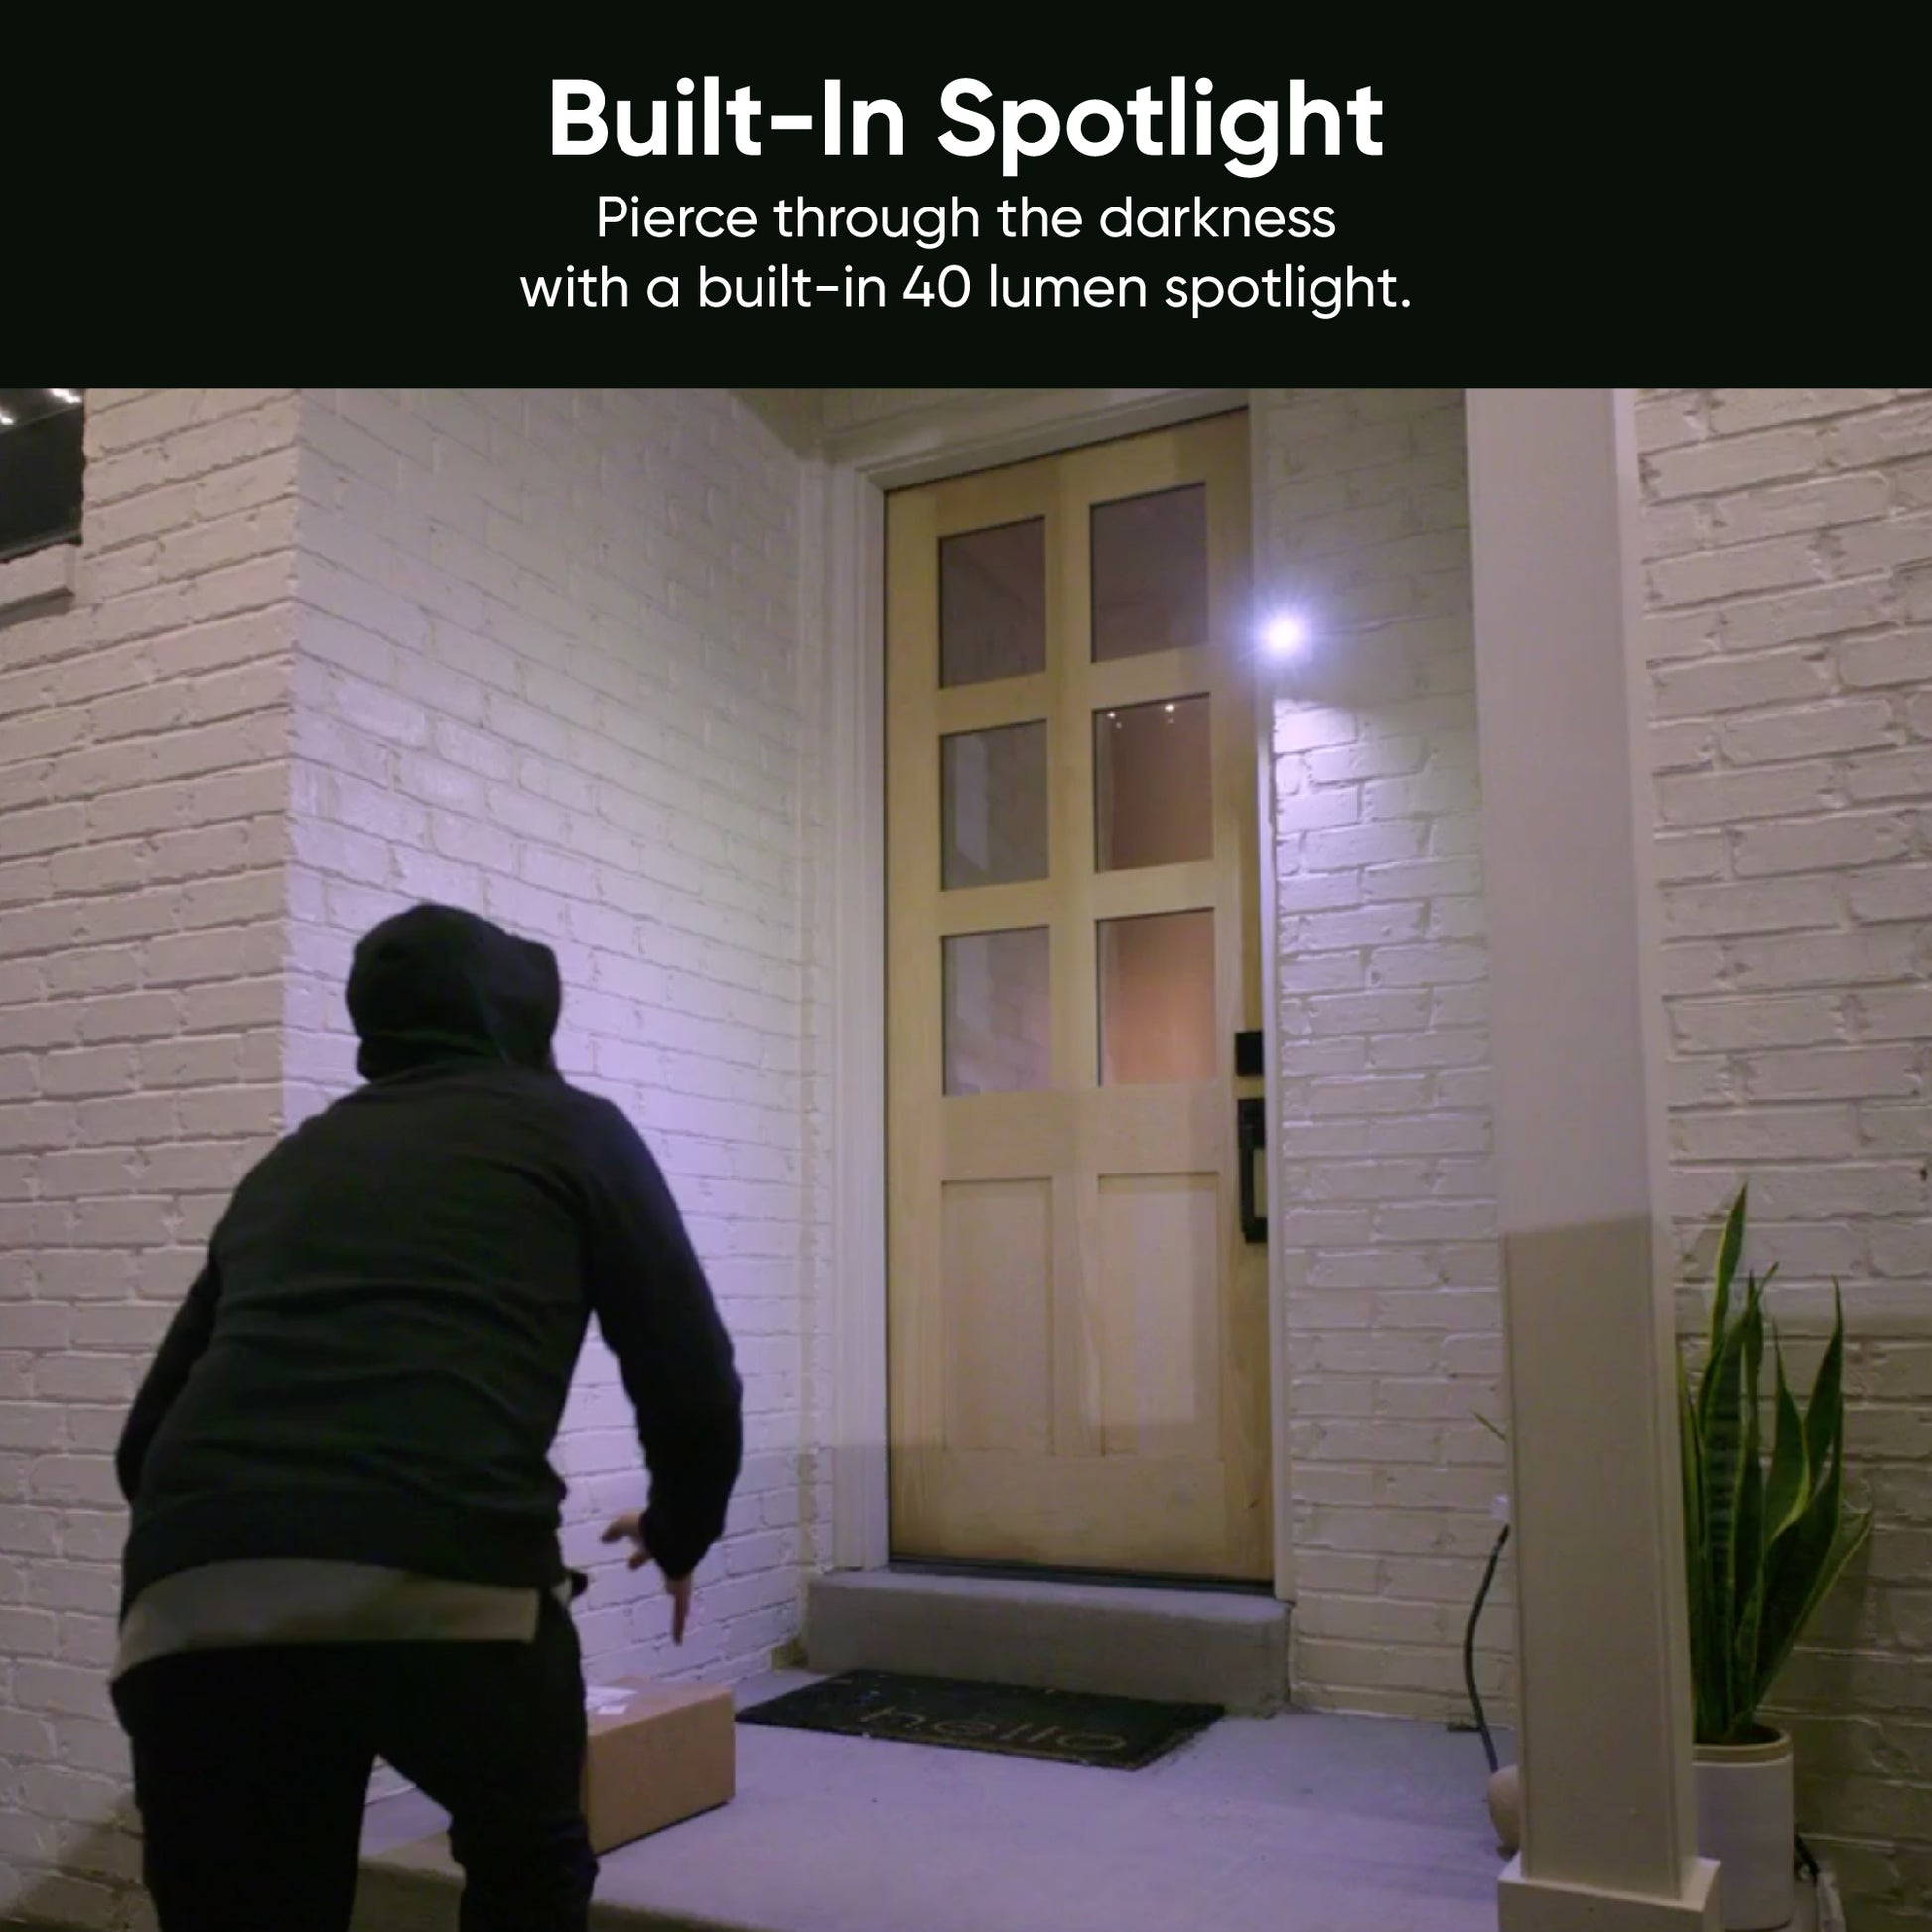 Built-in spotlight shining on hooded figure approaching a package on the front porch. Text overlay "Built-In Spotlight."